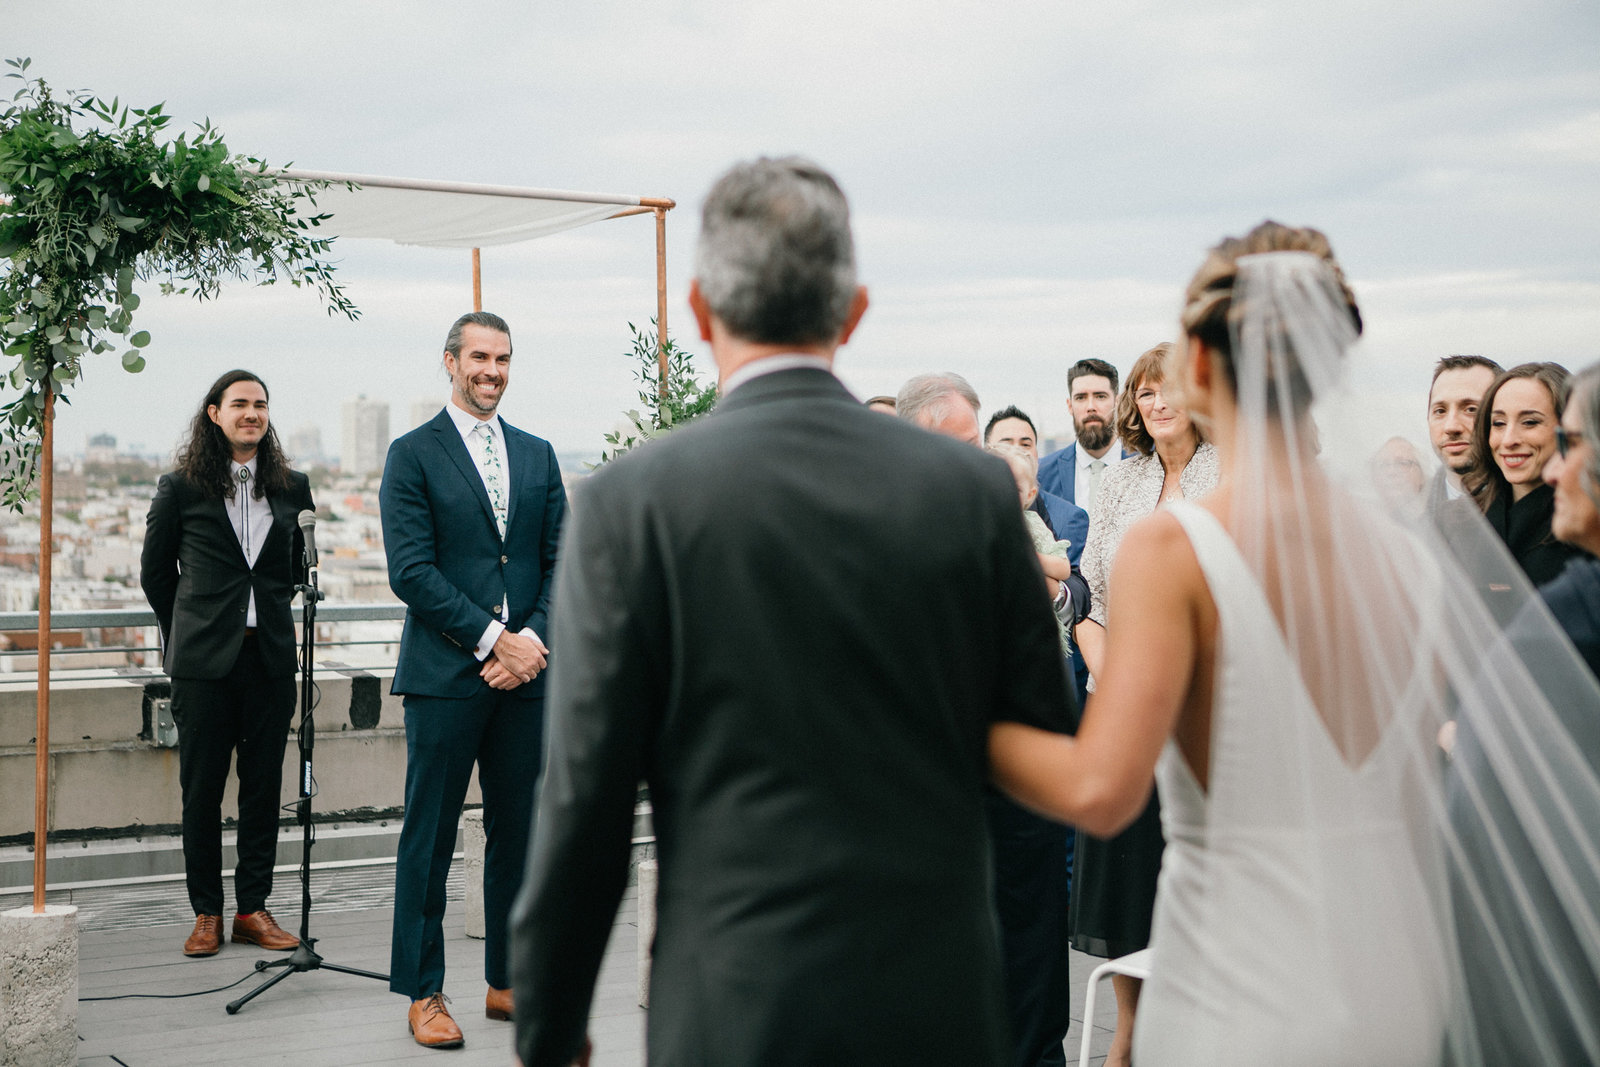 Bride walking down the aisle at this rooftop wedding ceremony in Philadelphia.